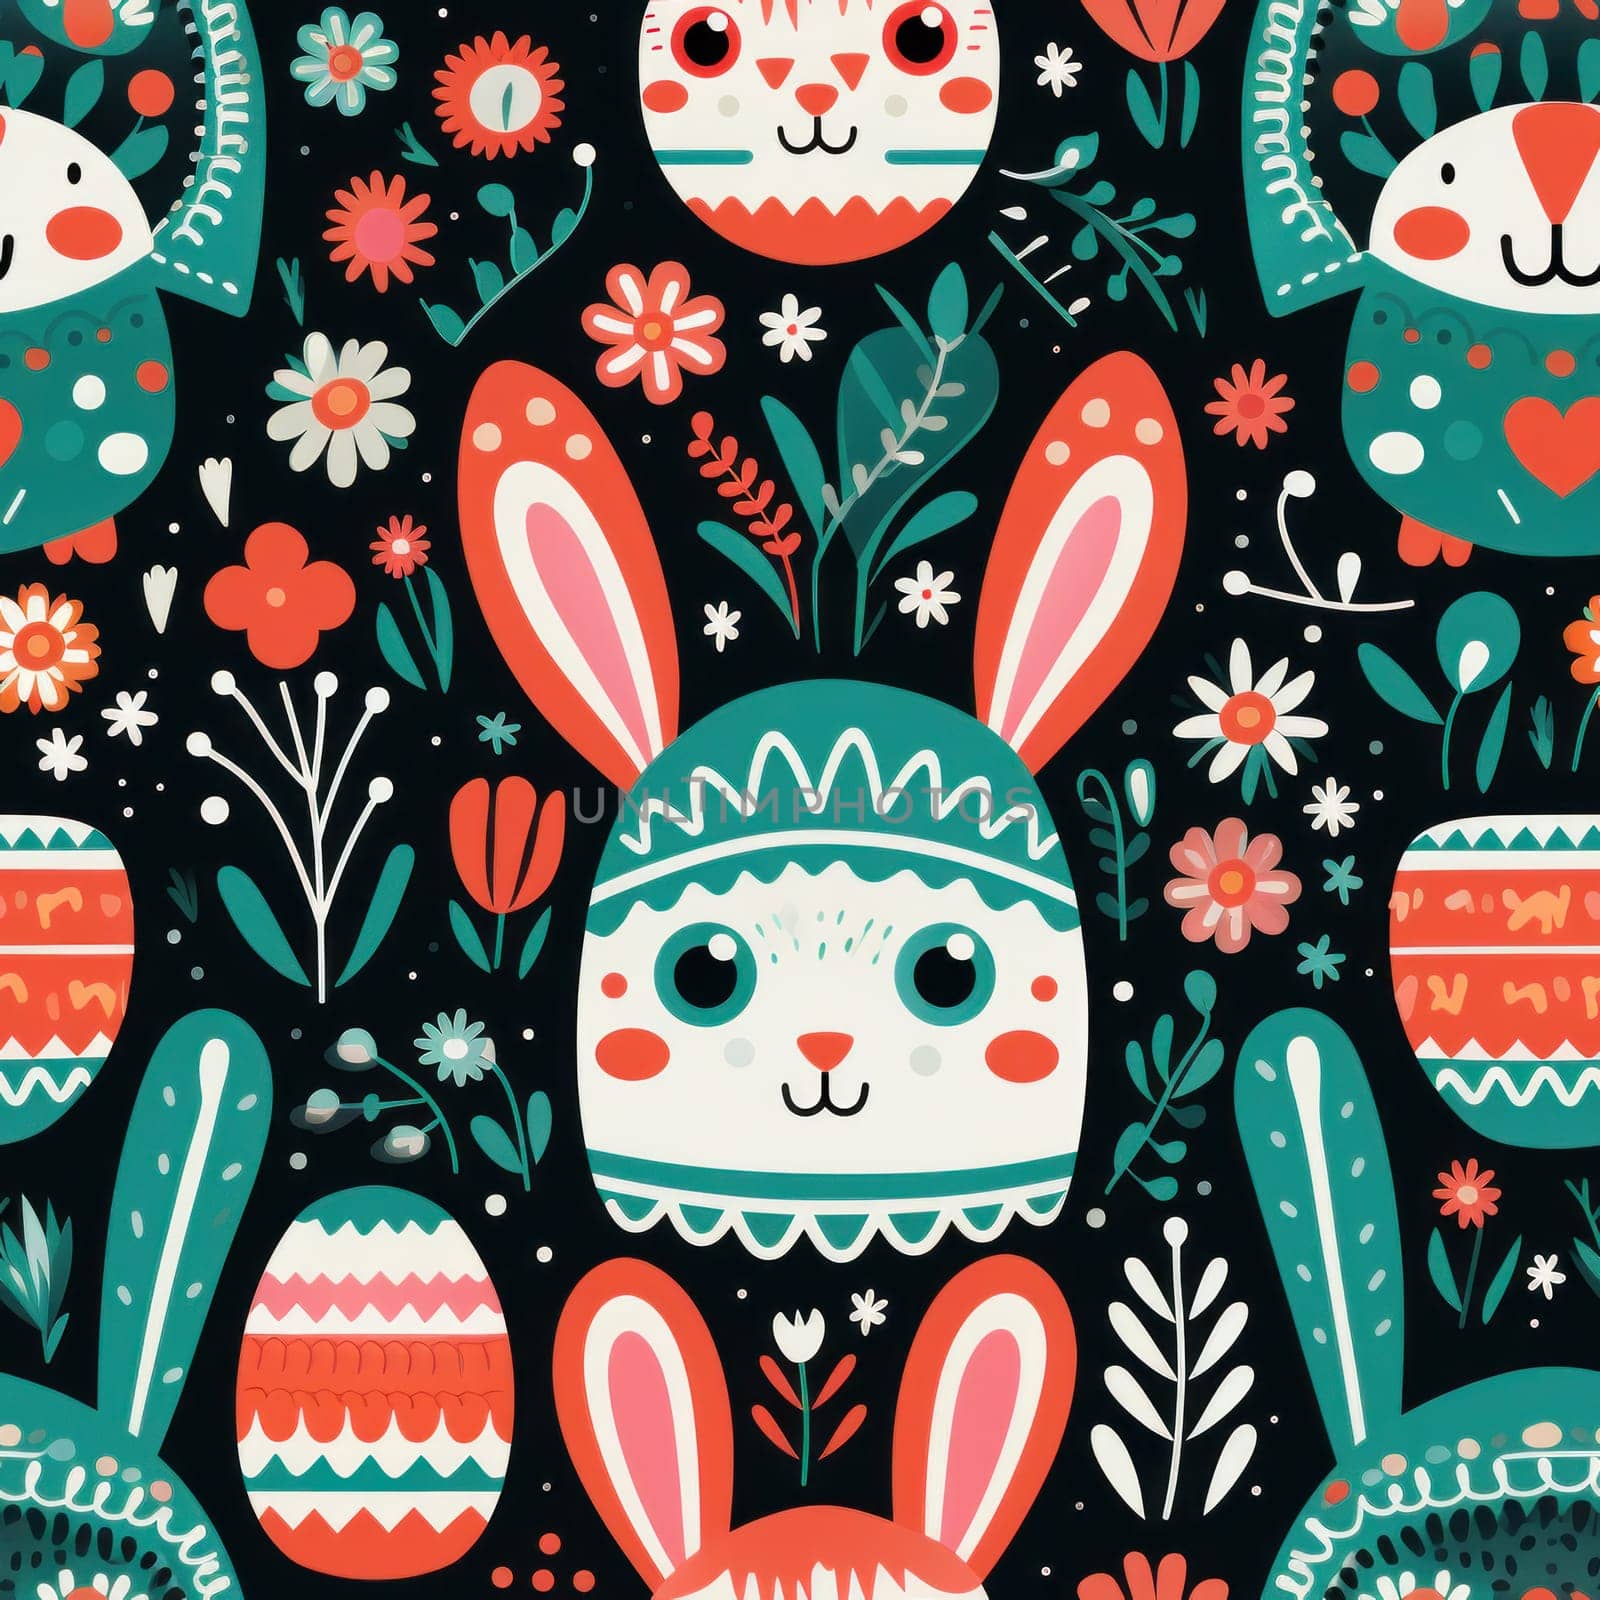 A pattern with cute bunny and flower designs on a black background